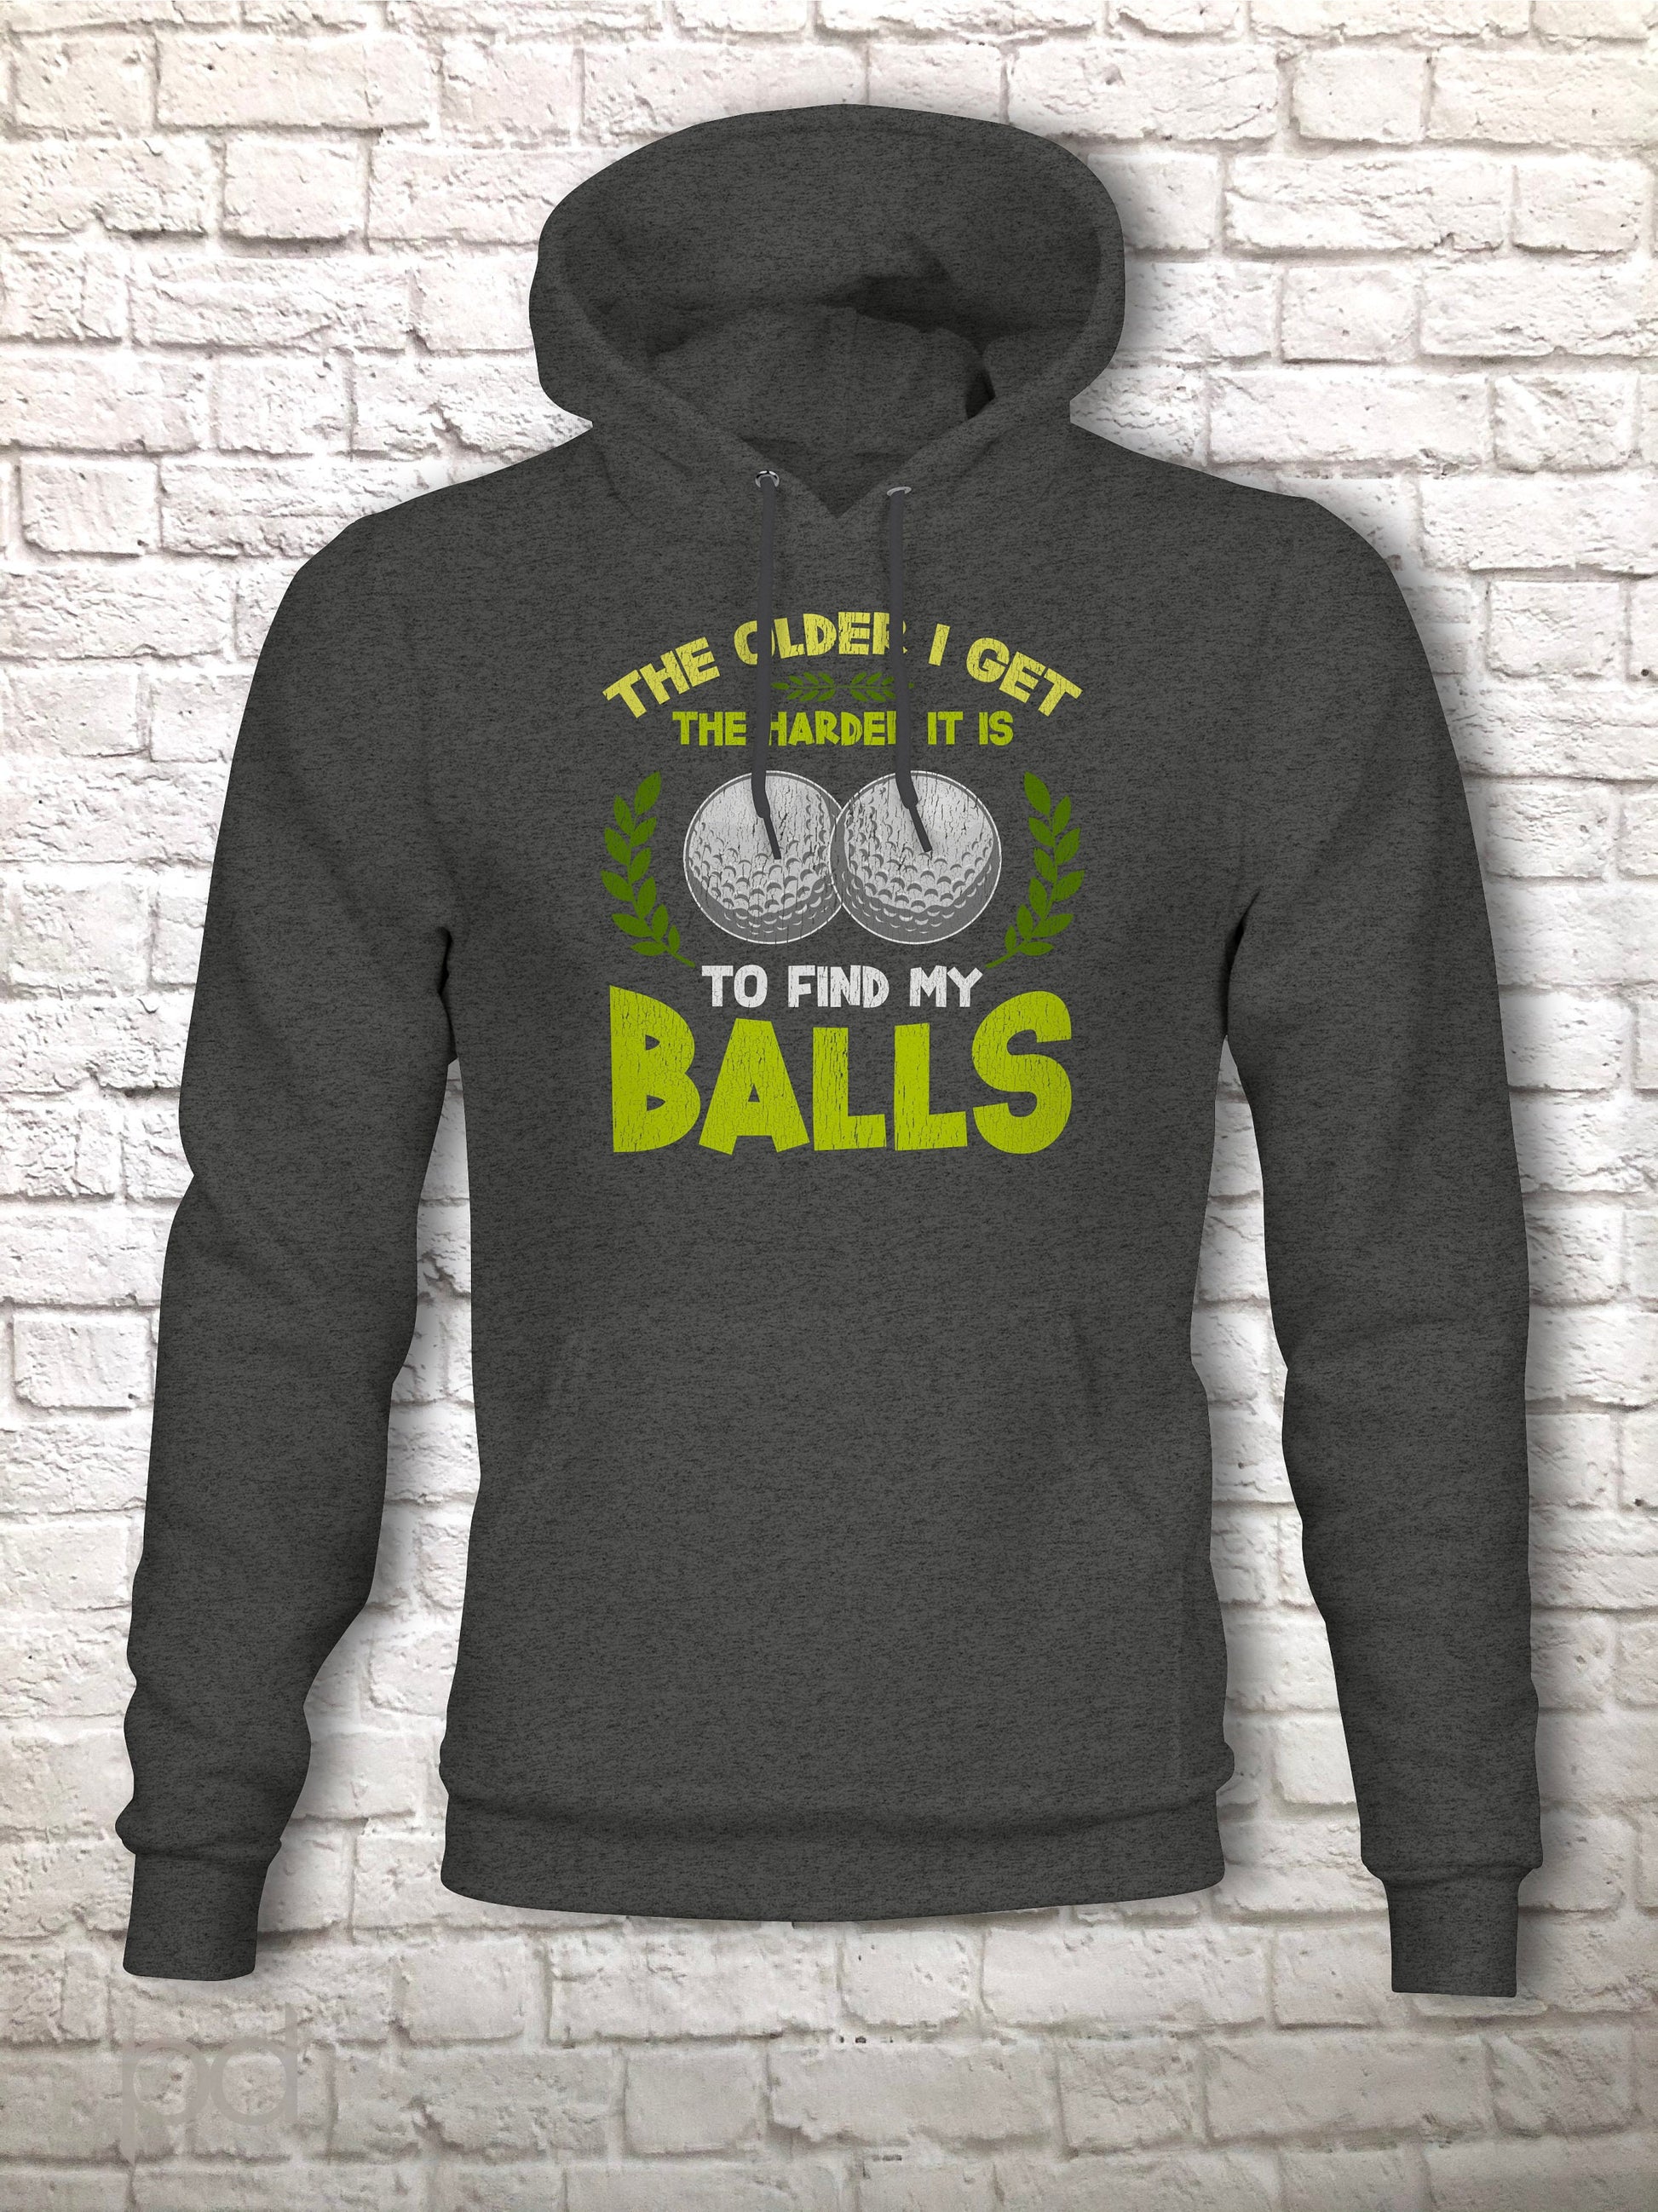 Funny Golf Hoodie, Humorous Golfing Meme for the Retired Older Gentleman Golfer Pullover Hooded Sweater, Take Balls to Find My Balls Top